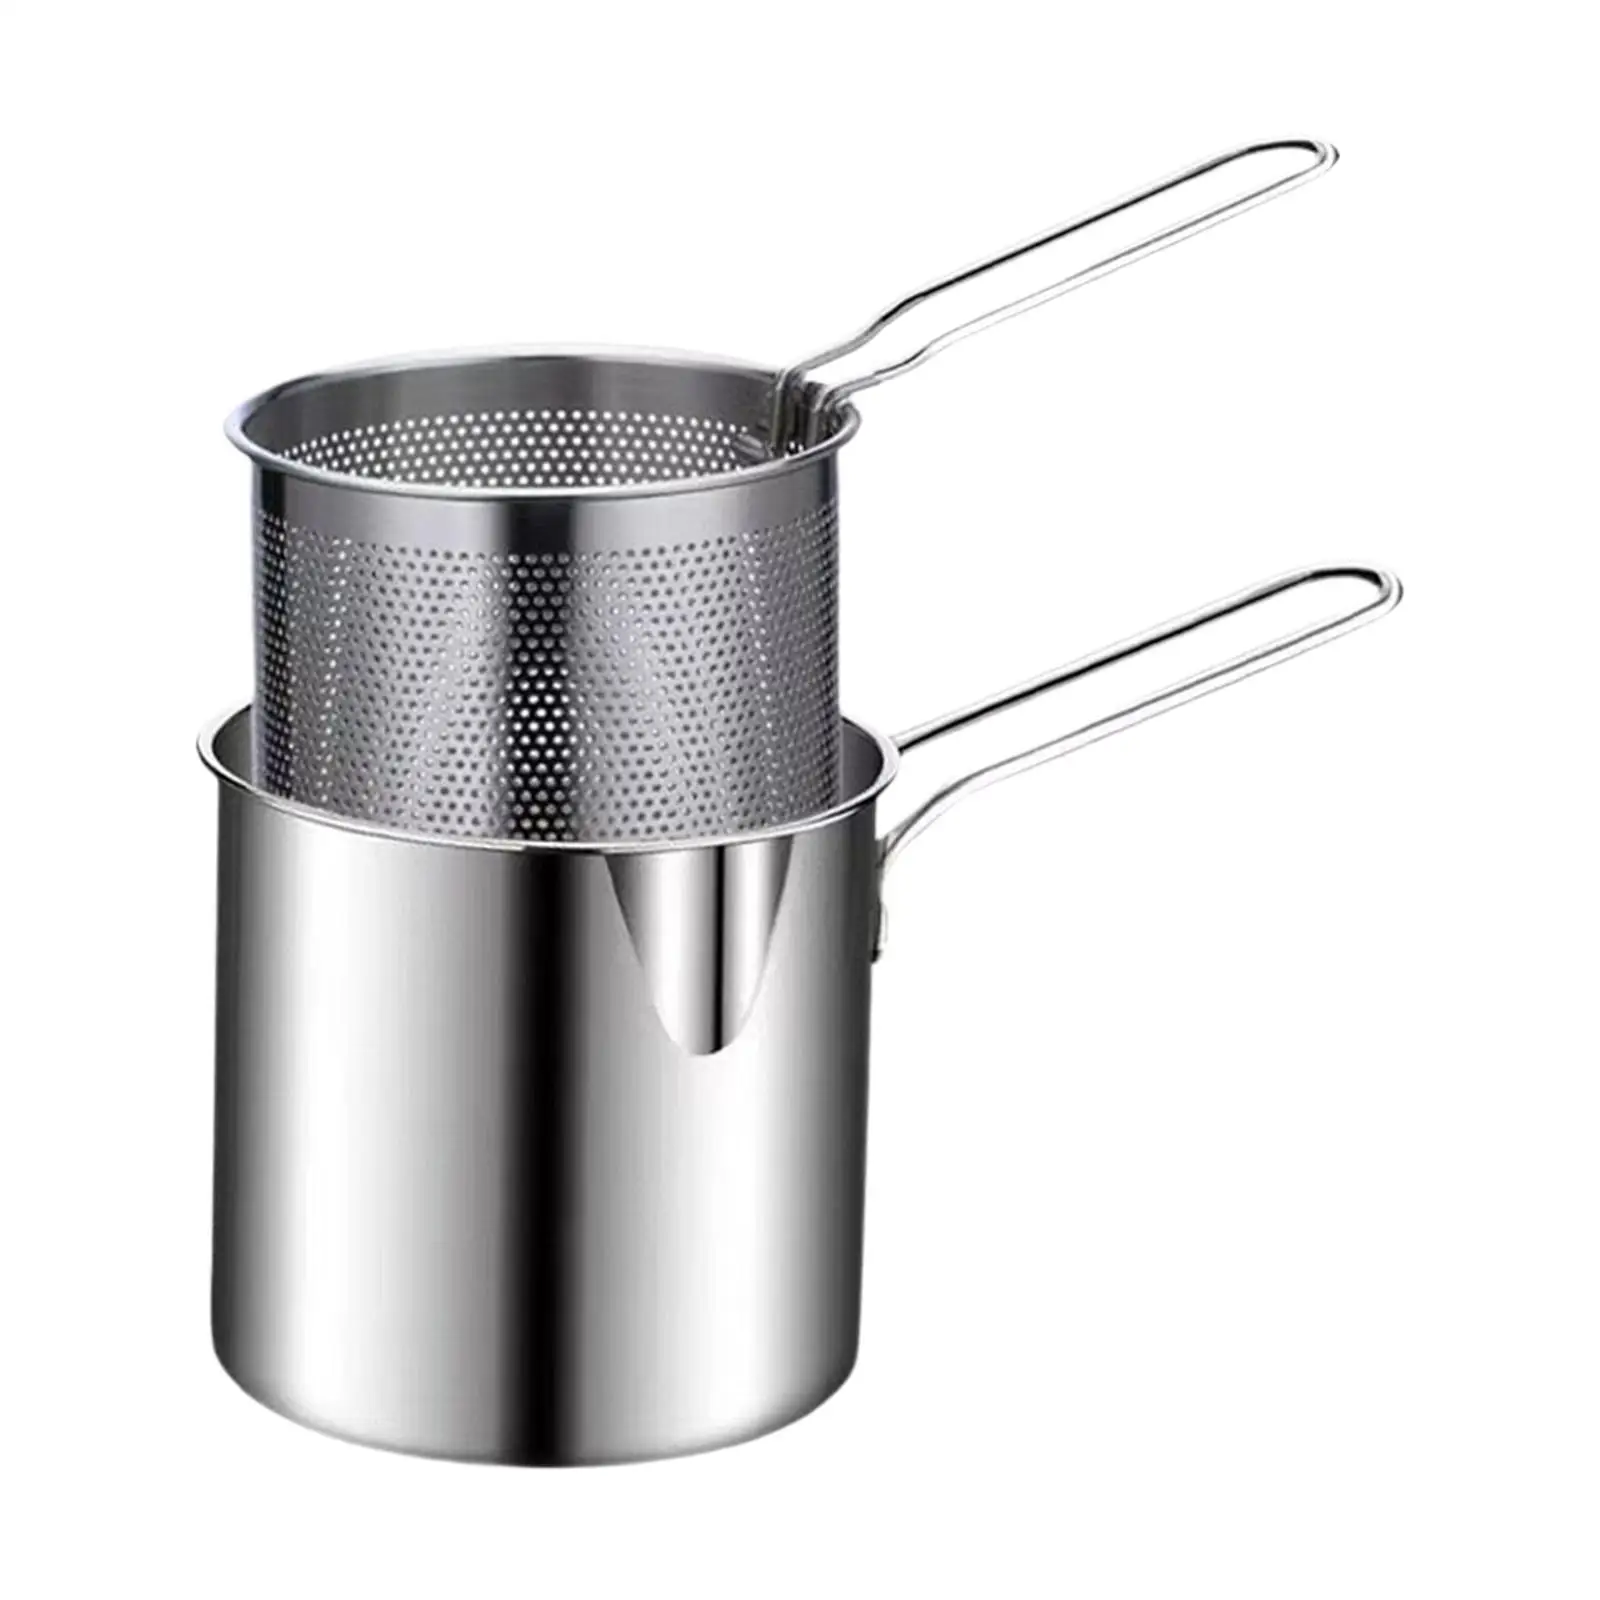 Deep Fry Pan with Strainer Detachable for Outdoor Kitchen French Fries